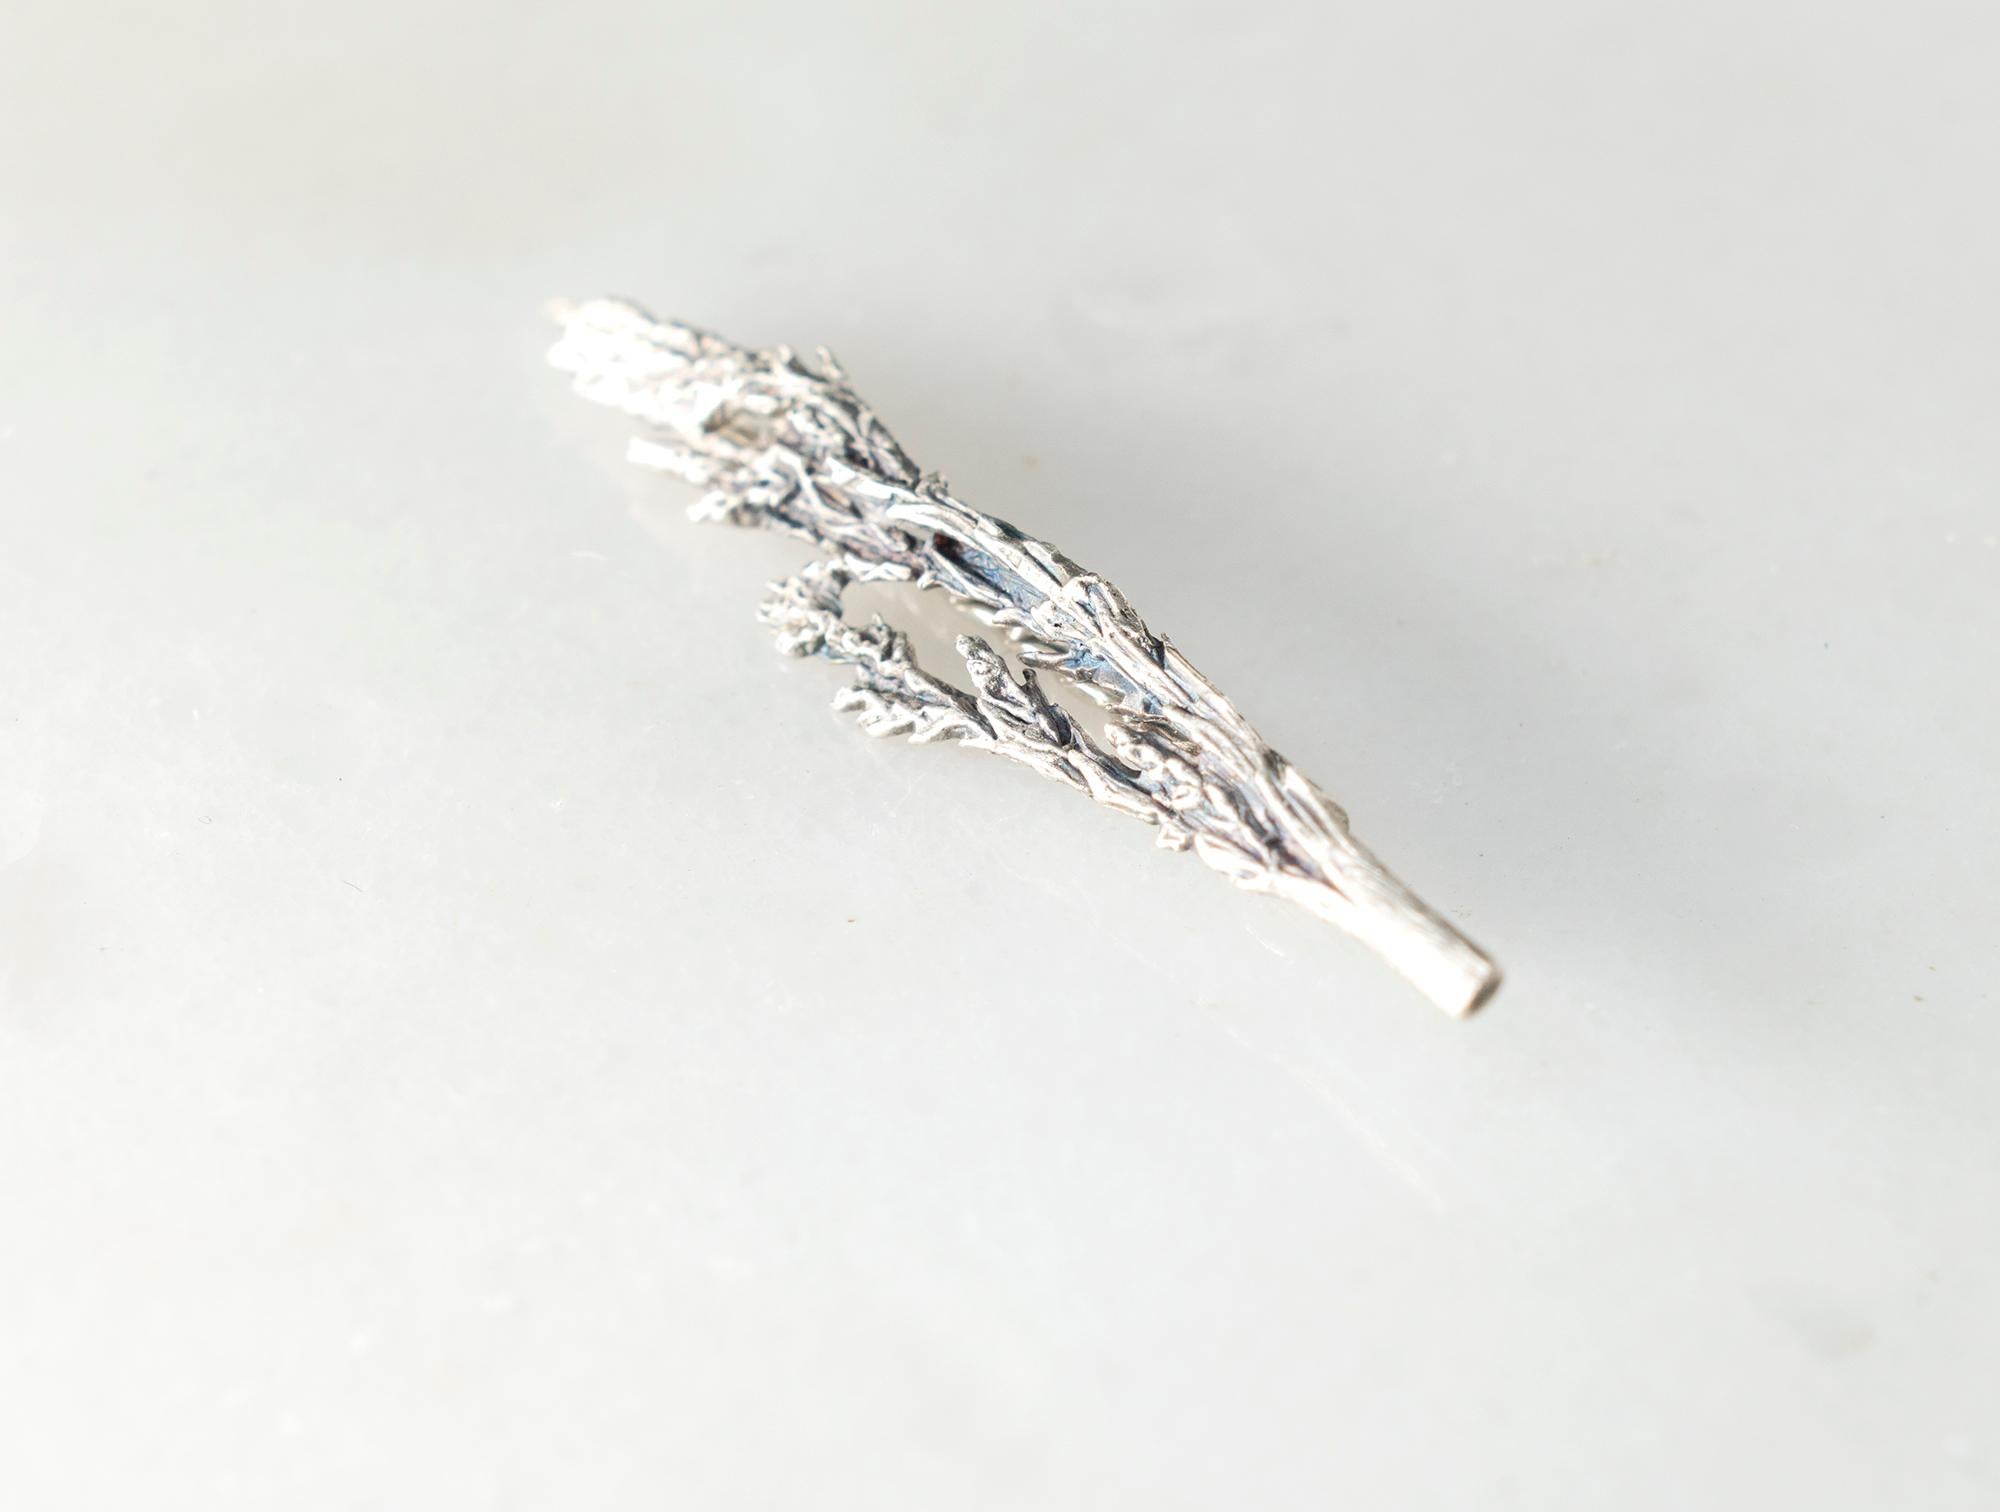 This contemporary sculptural brooch, named Juniper, is made of sterling silver. It is a unique and special it-piece, featured in Vogue UA and mentioned in the editor's word.

The brooch can be worn in a chaotic and chic way, together with other